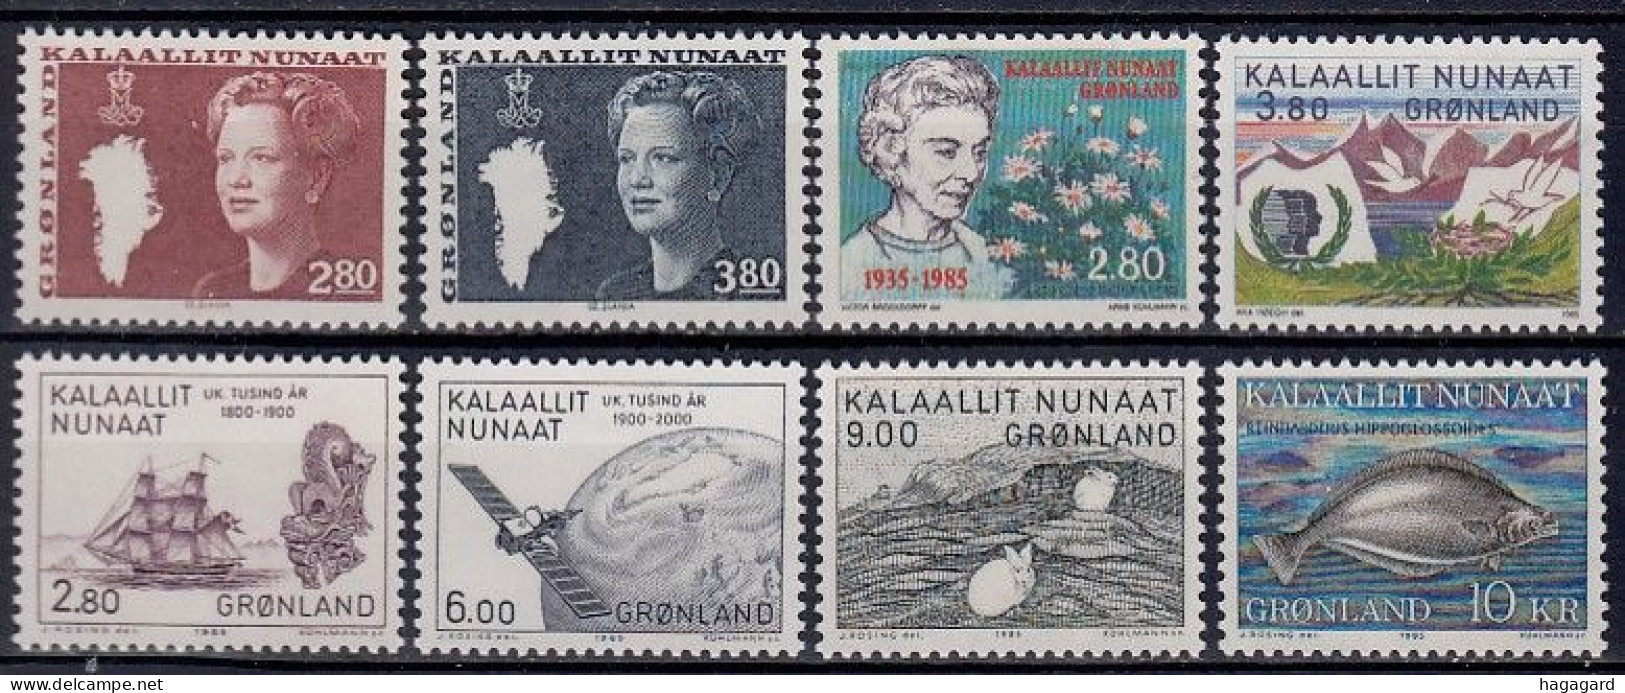 G2726. Greenland 1985. Complete Year Set. Michel 155-62. (15.10€). MNH(**) - Années Complètes